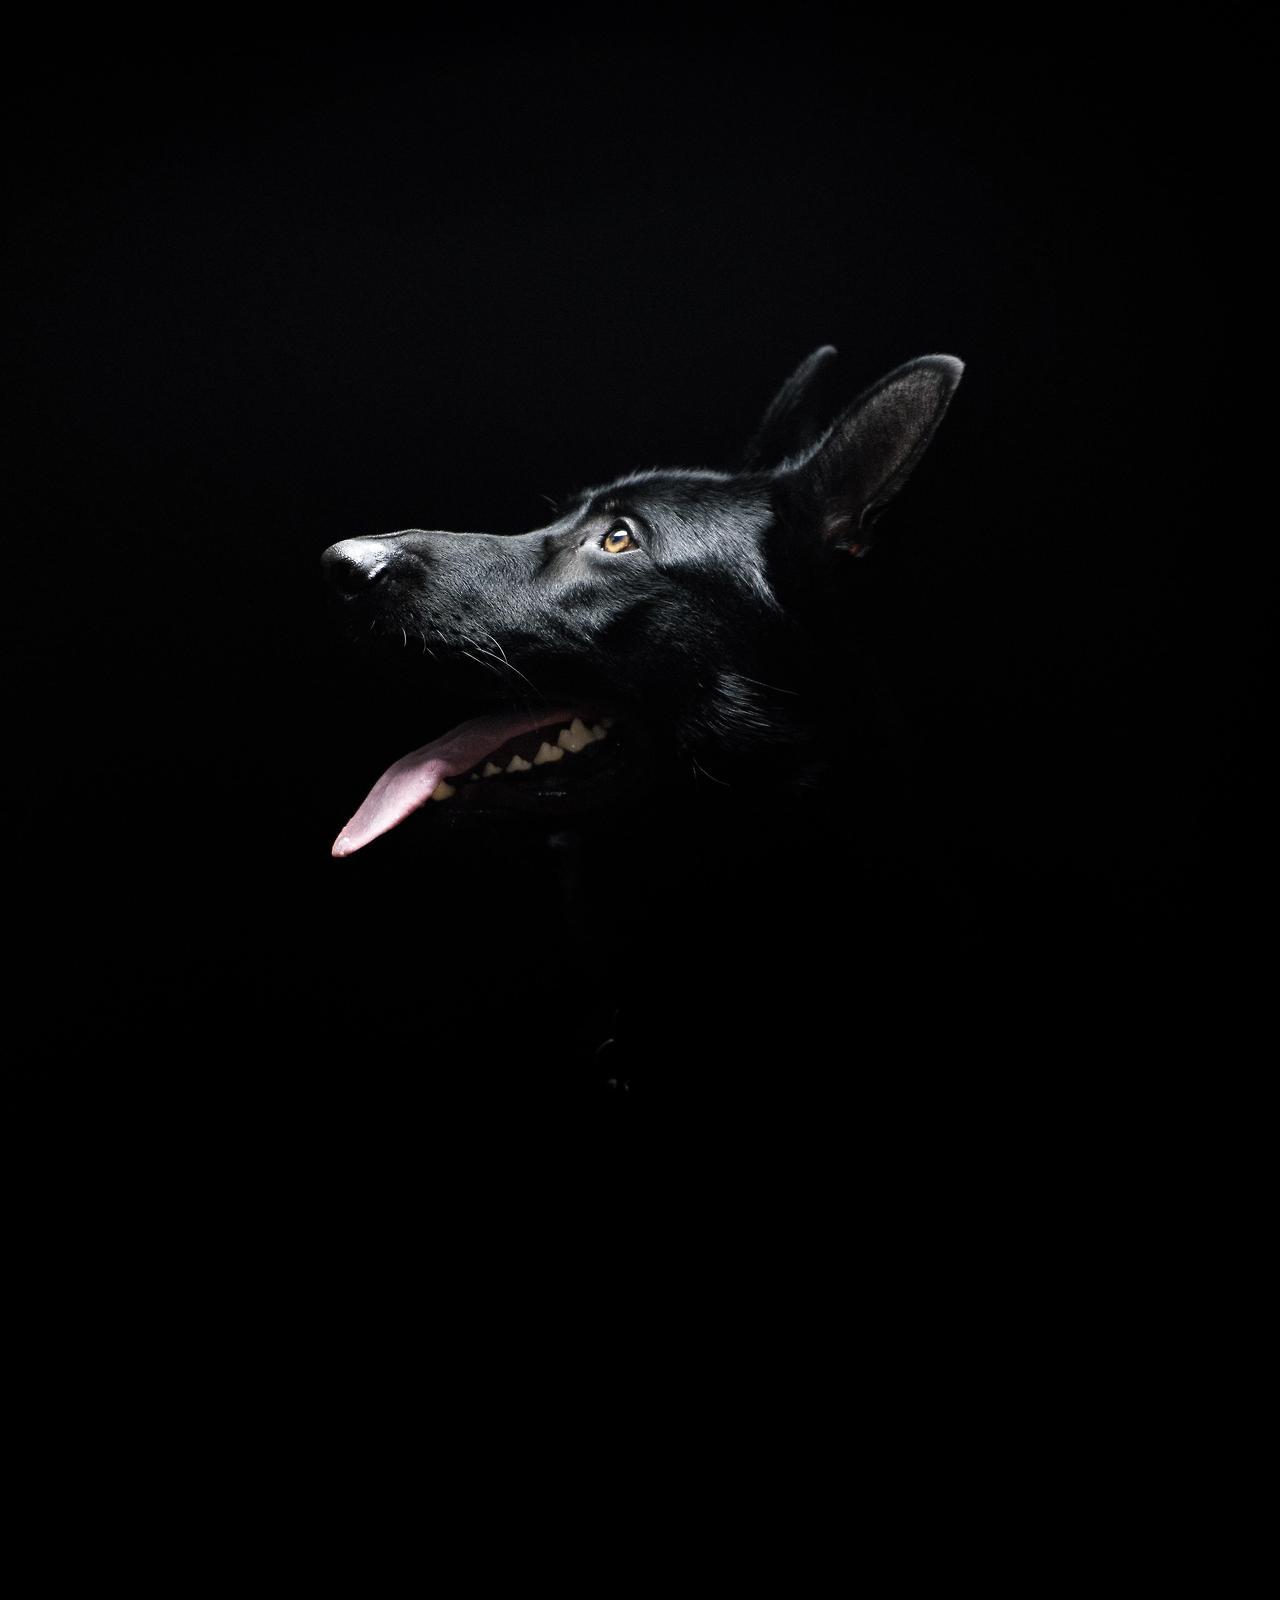 Took some portraits of my dog yesterday. This is one of my favorites from the shoot. (Source: http://ift.tt/2eyMXTO)